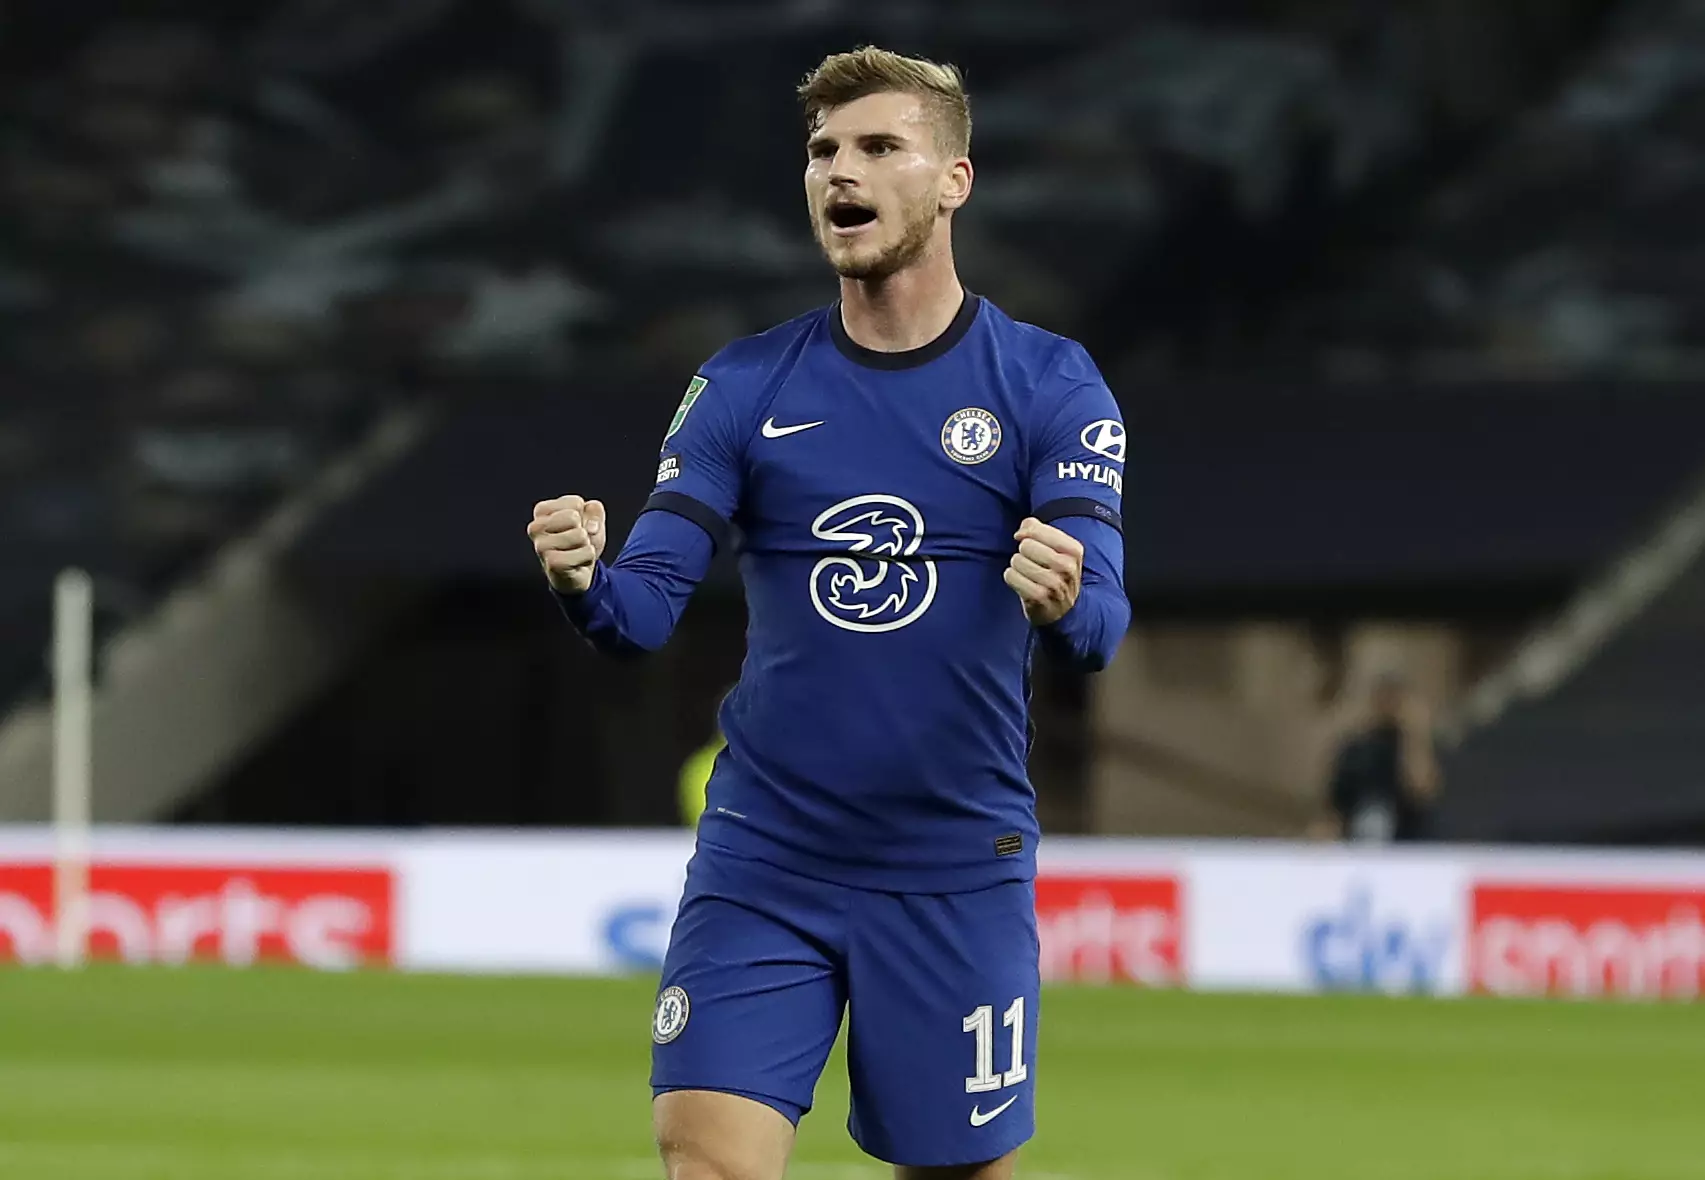 Werner is one of six new signings but is on less than fellow Chelsea new boy Ben Chilwell. Image: PA Images